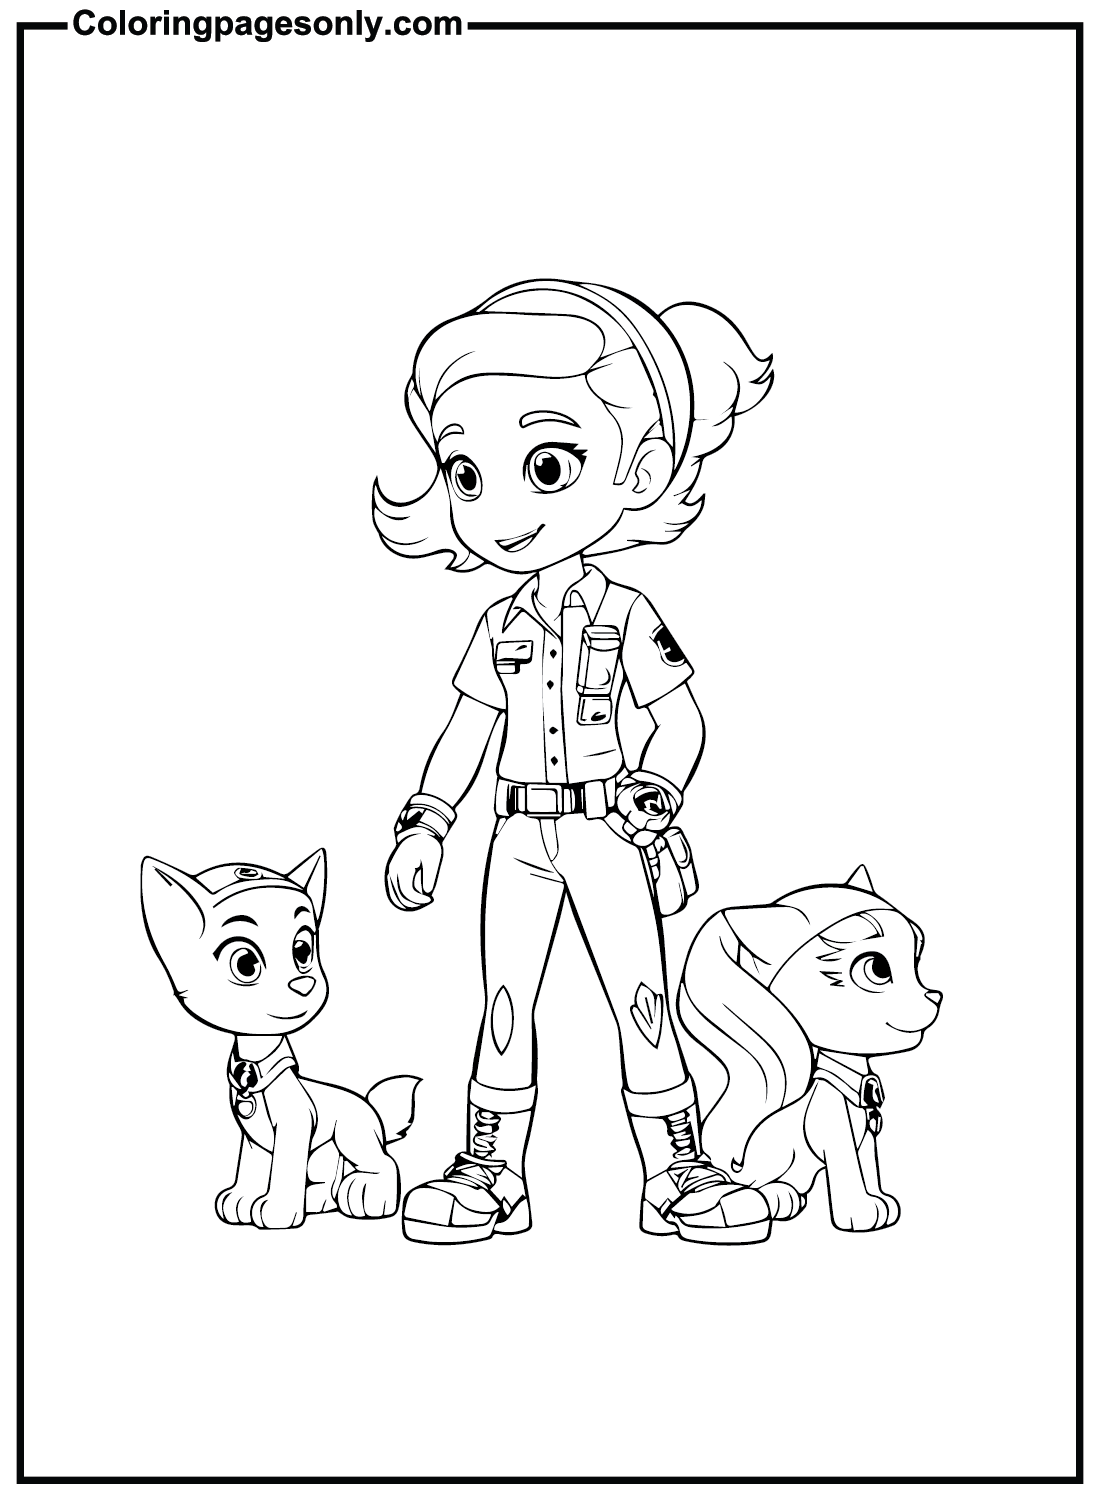 Rainbow Rangers Printable Coloring Pages